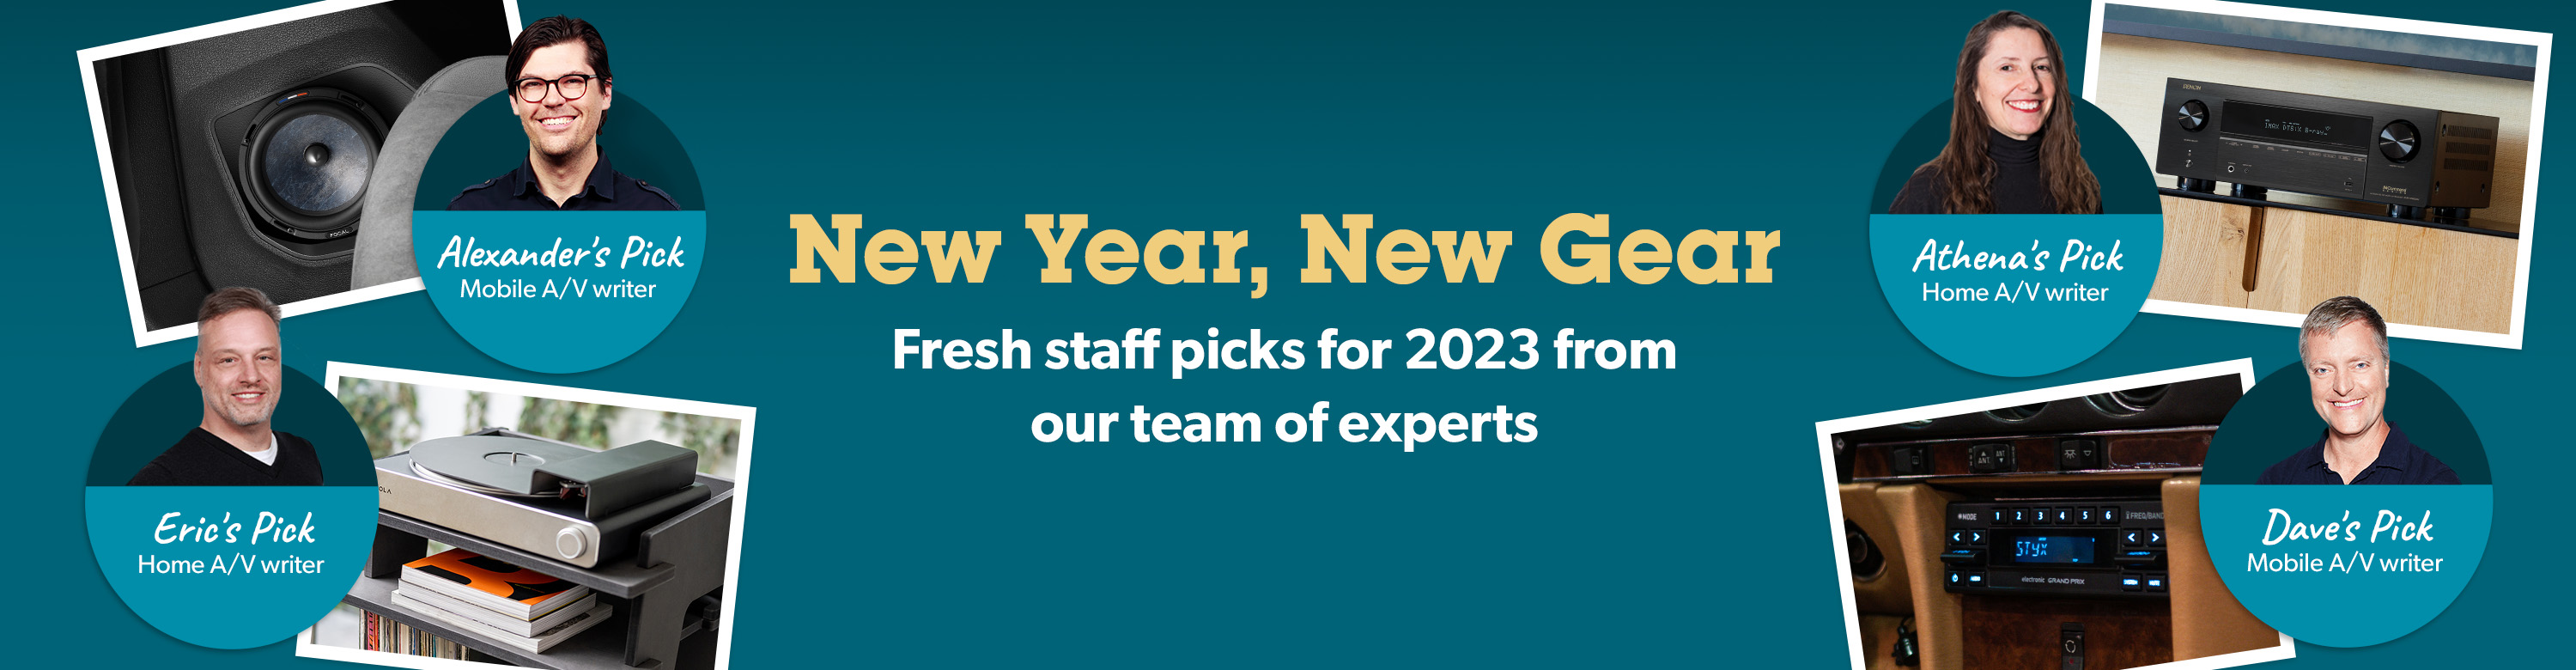 w Year, New Gear. Our favorite new stuff for 2023, chosen by our expert team of staff writers 